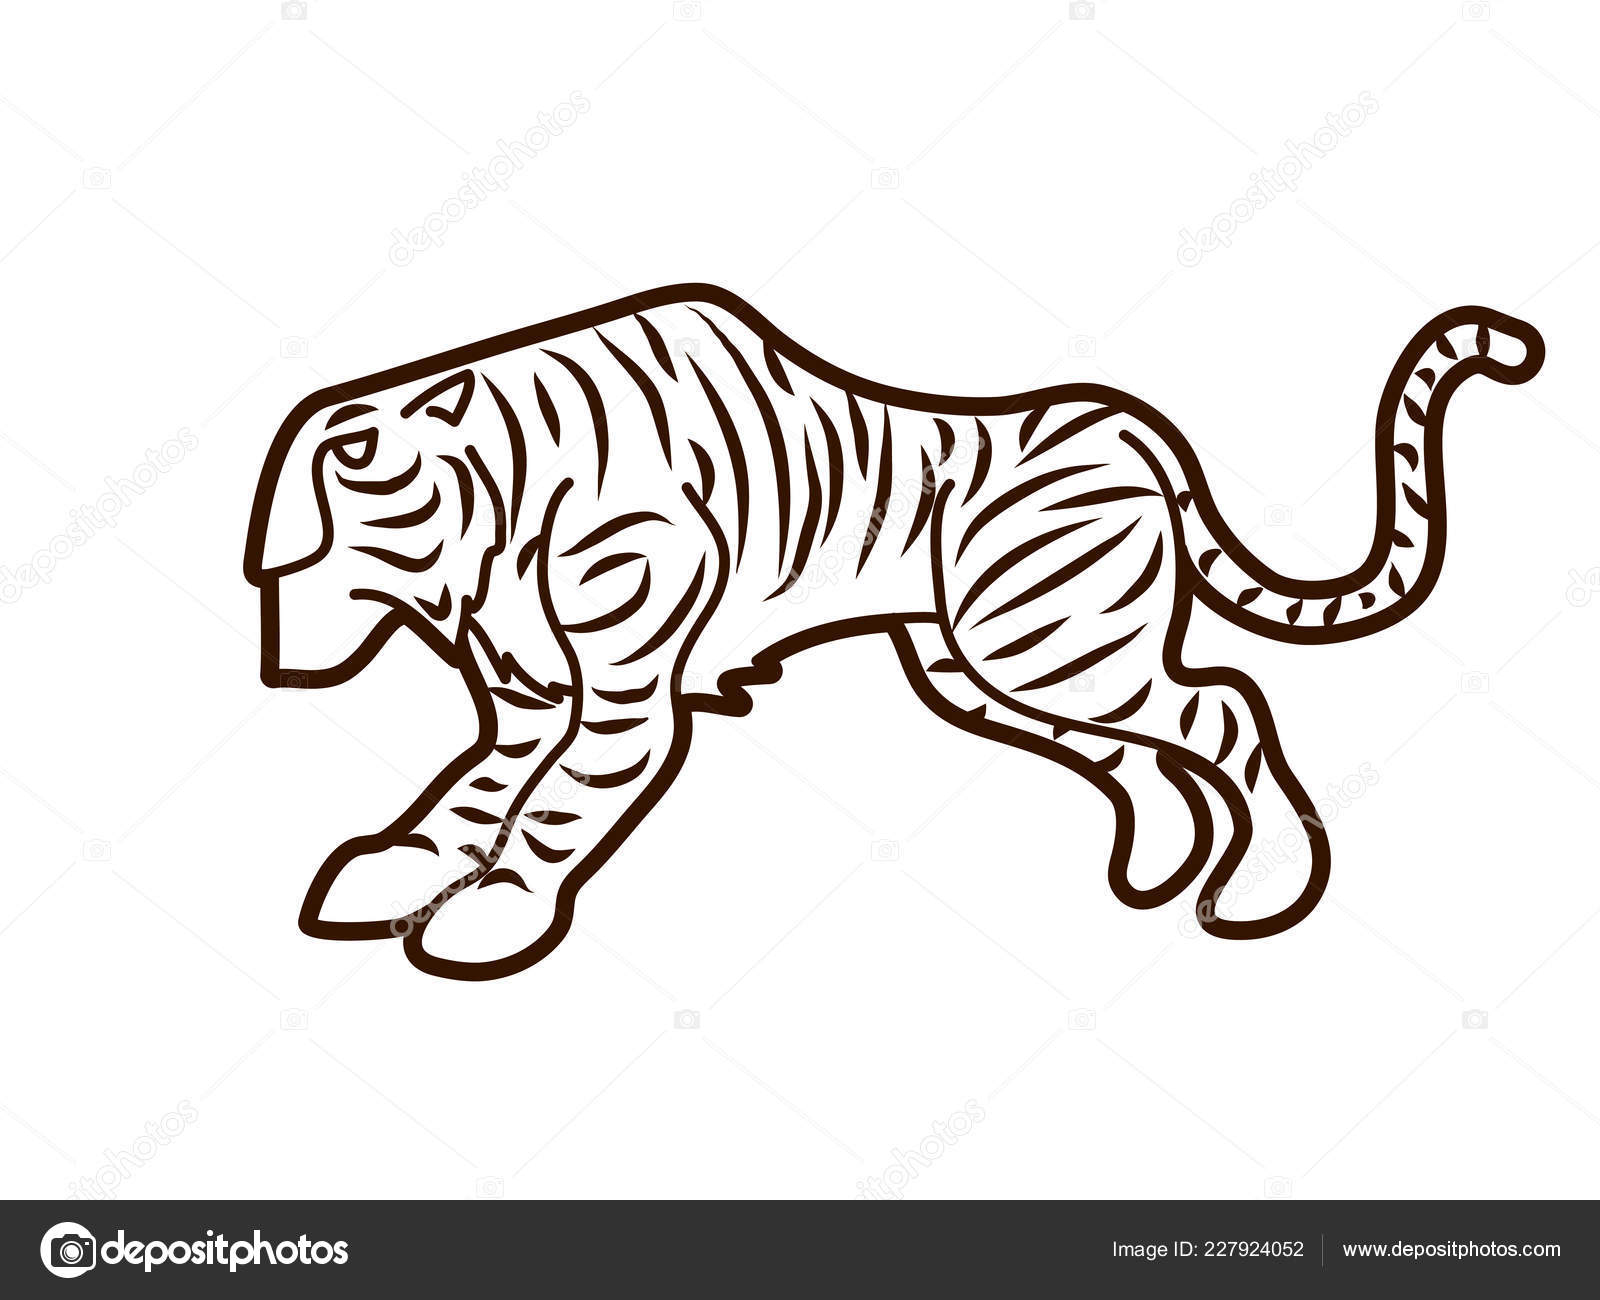 4,251 Tiger Front View Images, Stock Photos, 3D objects, & Vectors